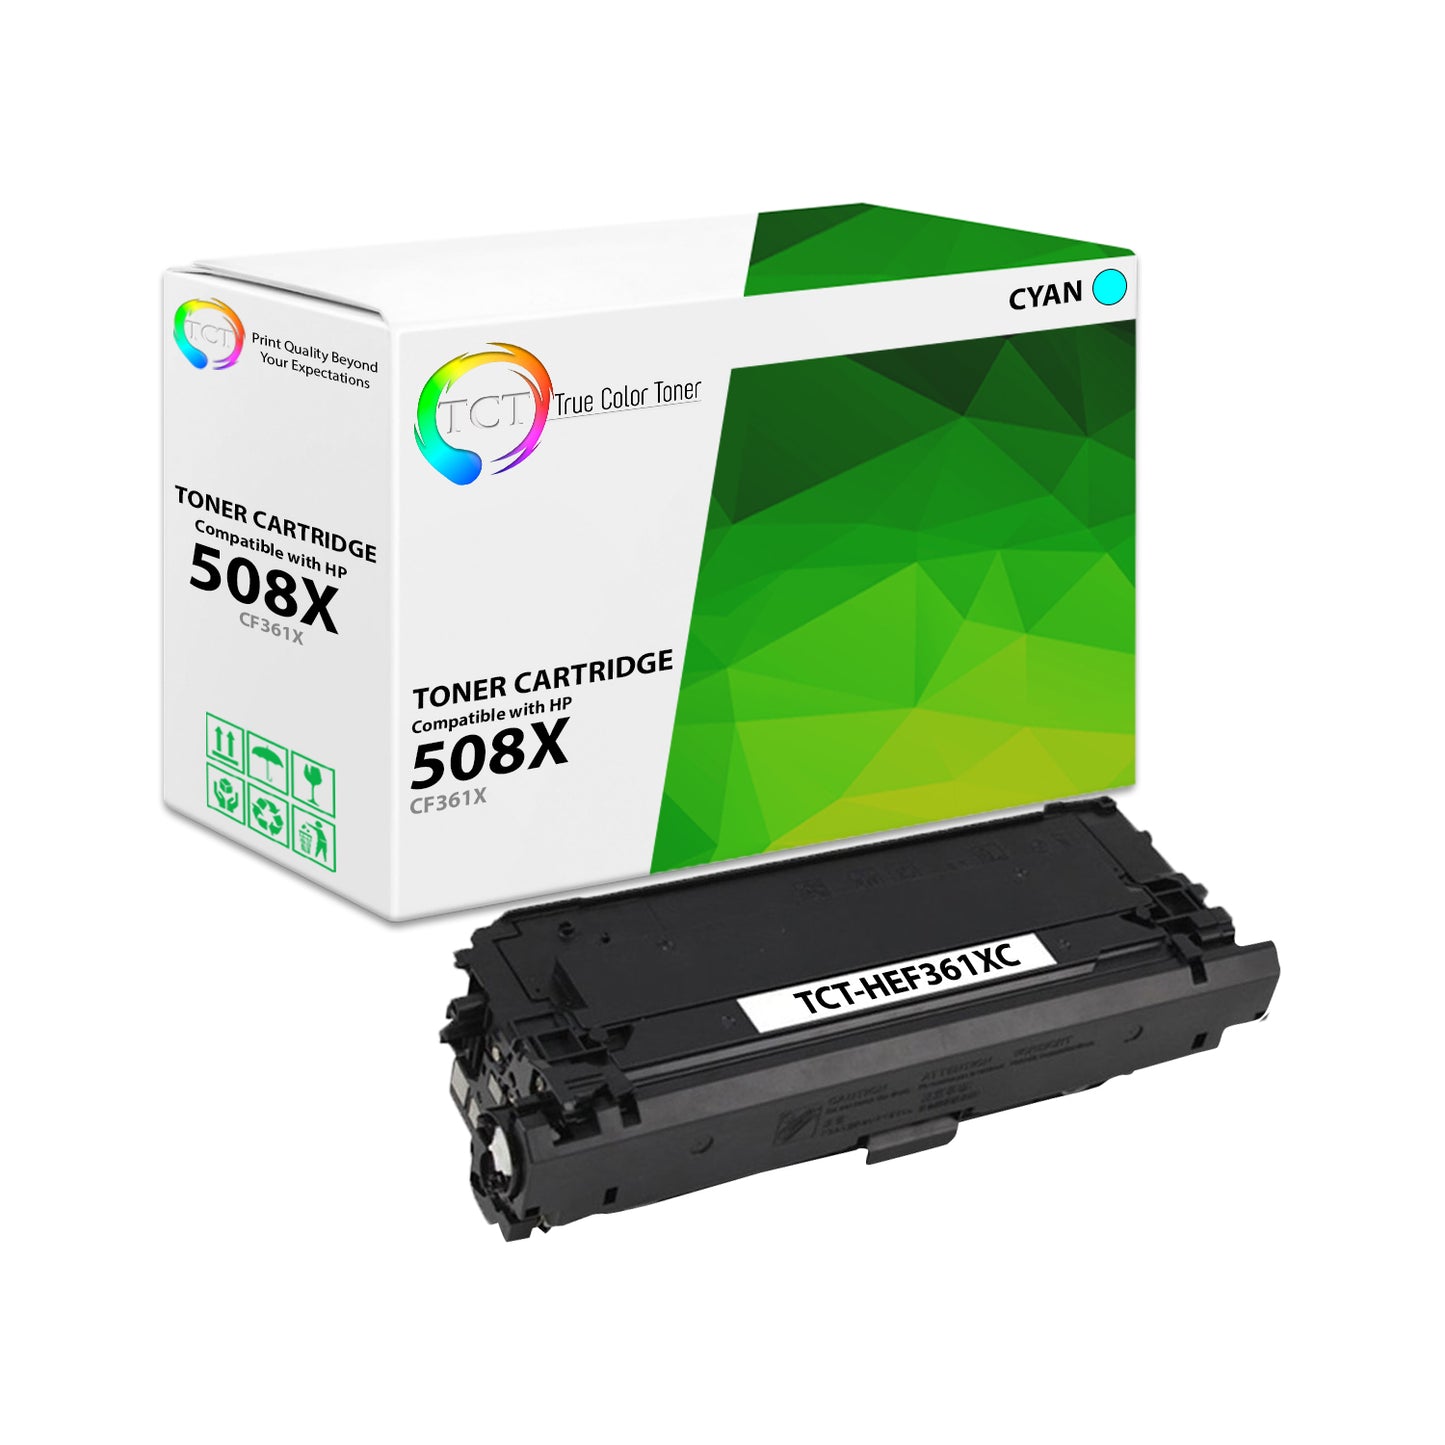 TCT Compatible High Yield Toner Cartridge Replacement for the HP 508X Series - 1 Pack Cyan